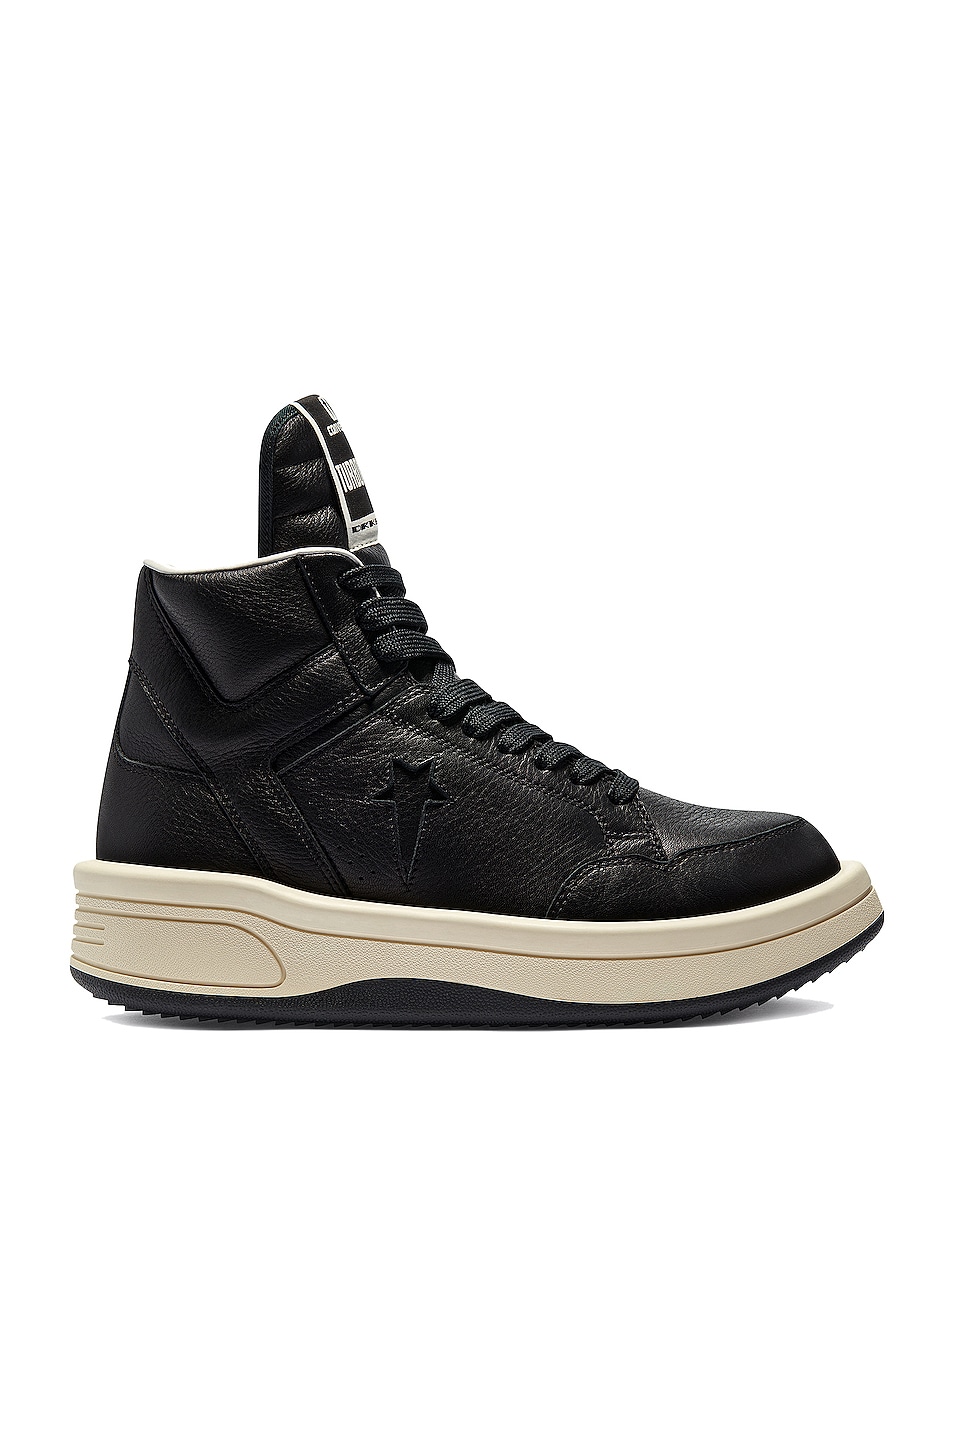 Image 1 of DRKSHDW by Rick Owens x Converse TurboWPN Boot in Black